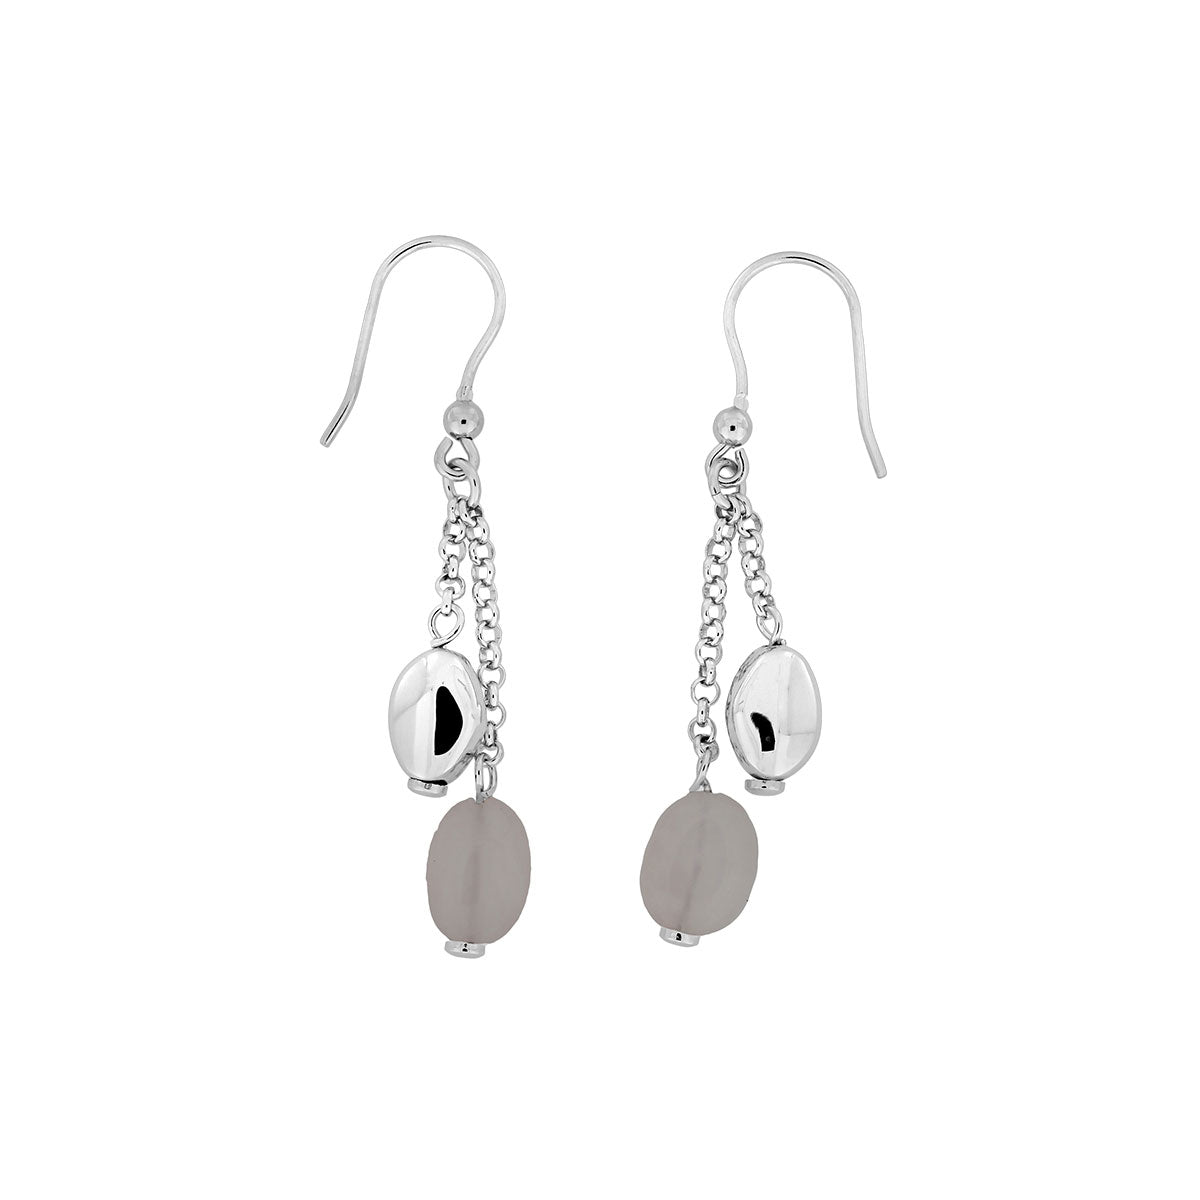 Silver Earrings with Quartz